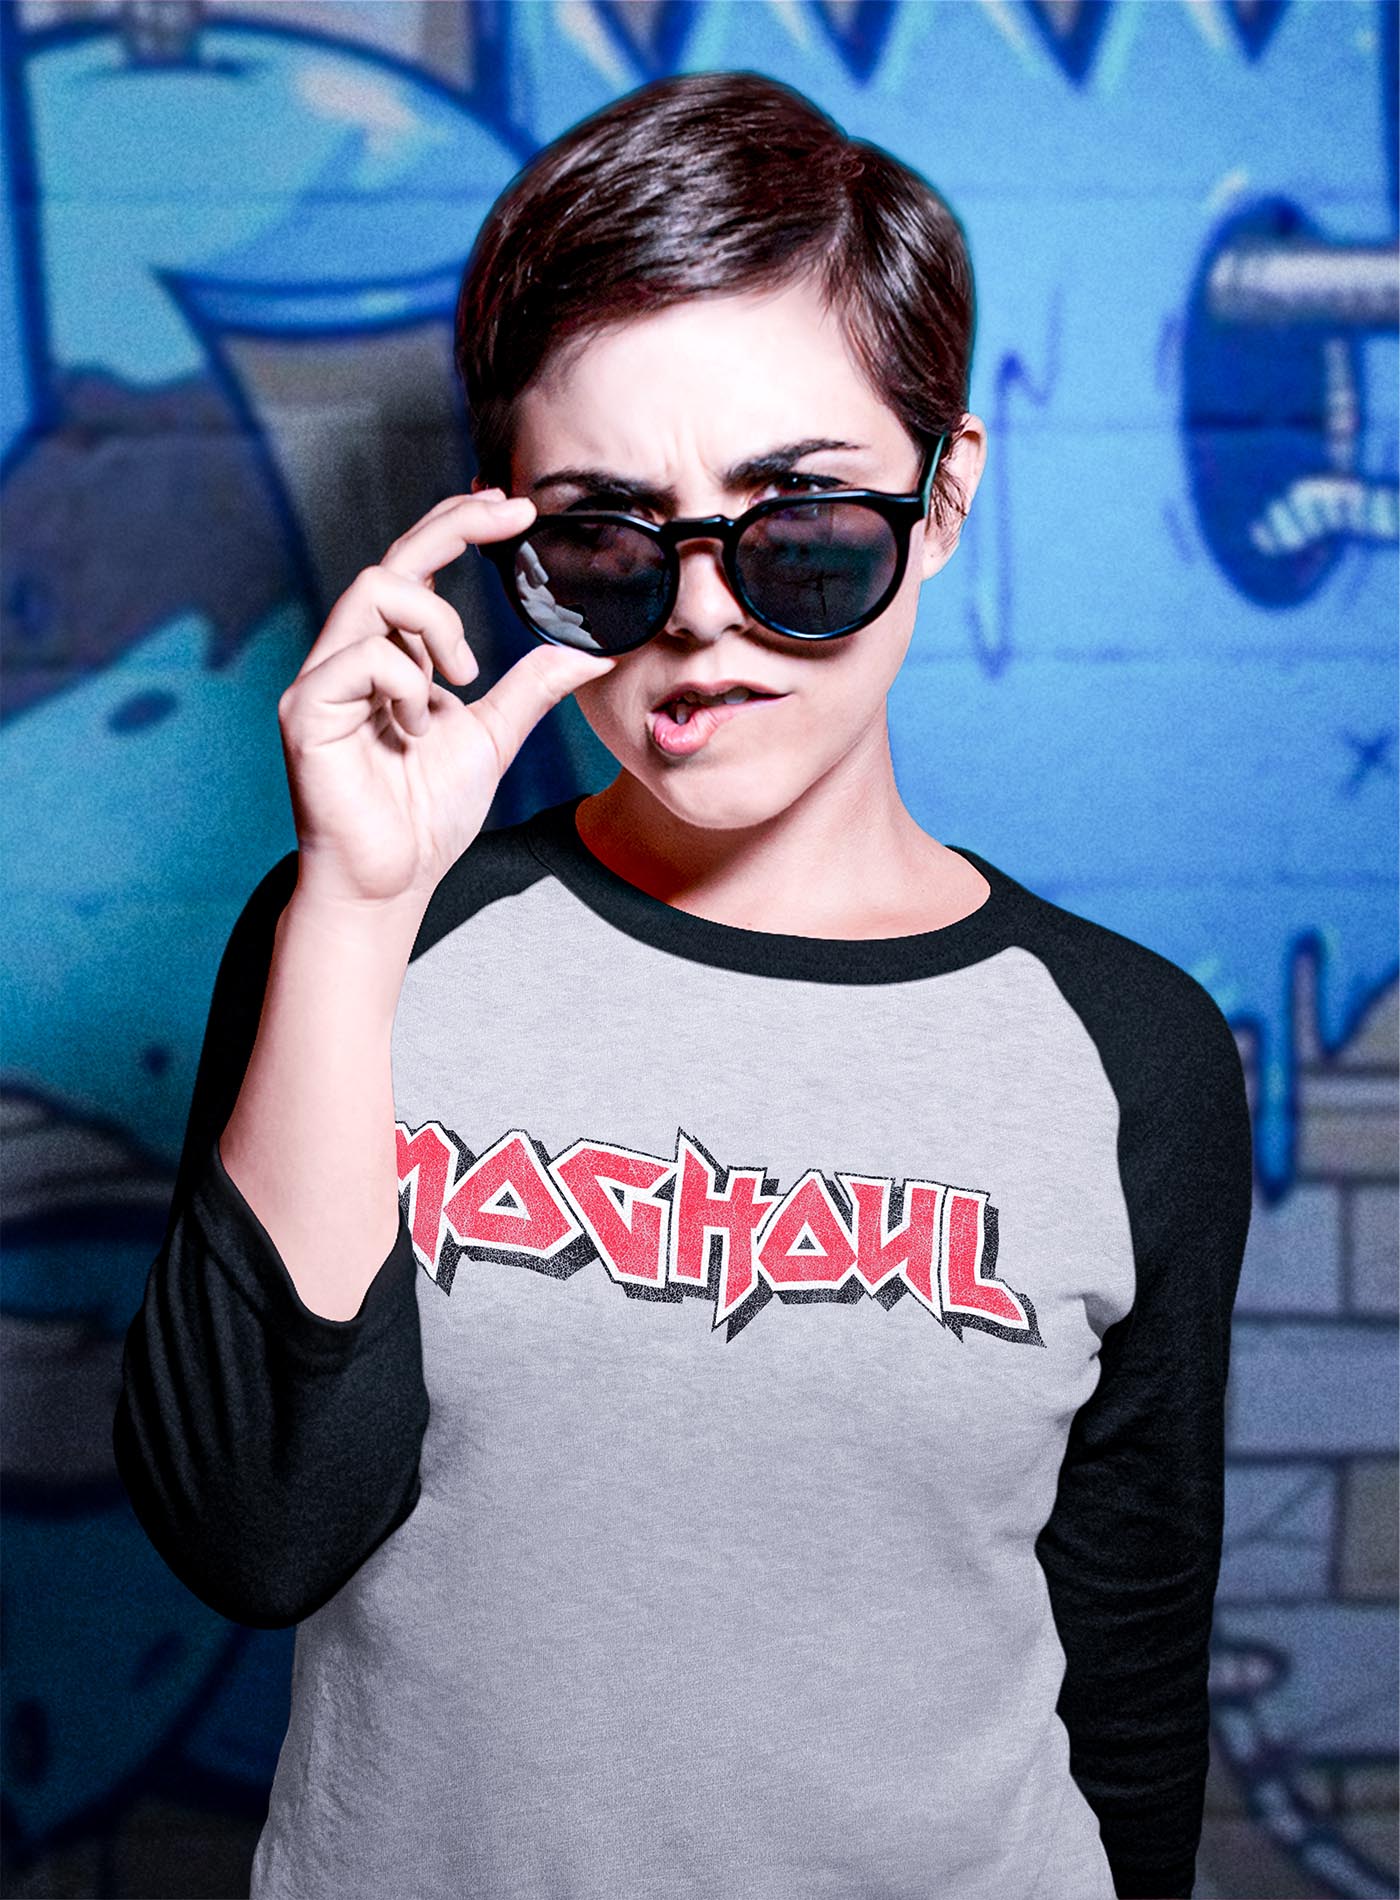 Female modeling a 3/4 sleeves raglan t-shirt featuring a front print of the Moghoul logo in vintage 80's hair-band style.